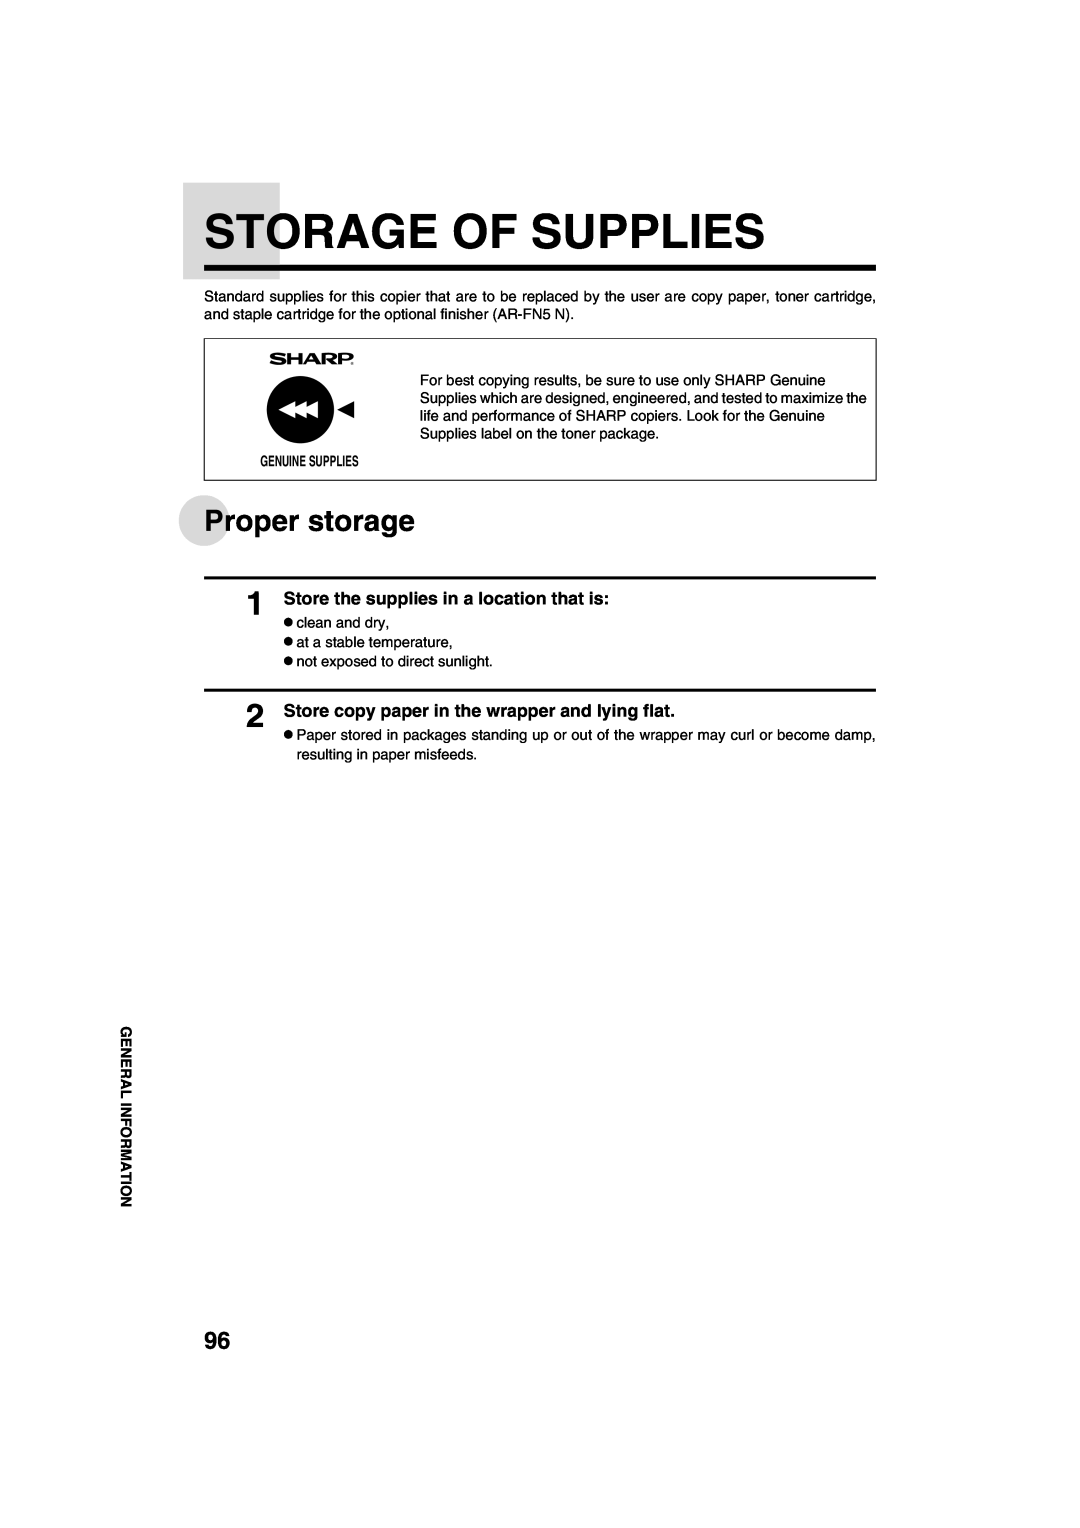 Sharp AR-M208 operation manual Storage Of Supplies, Proper storage, Store the supplies in a location that is 